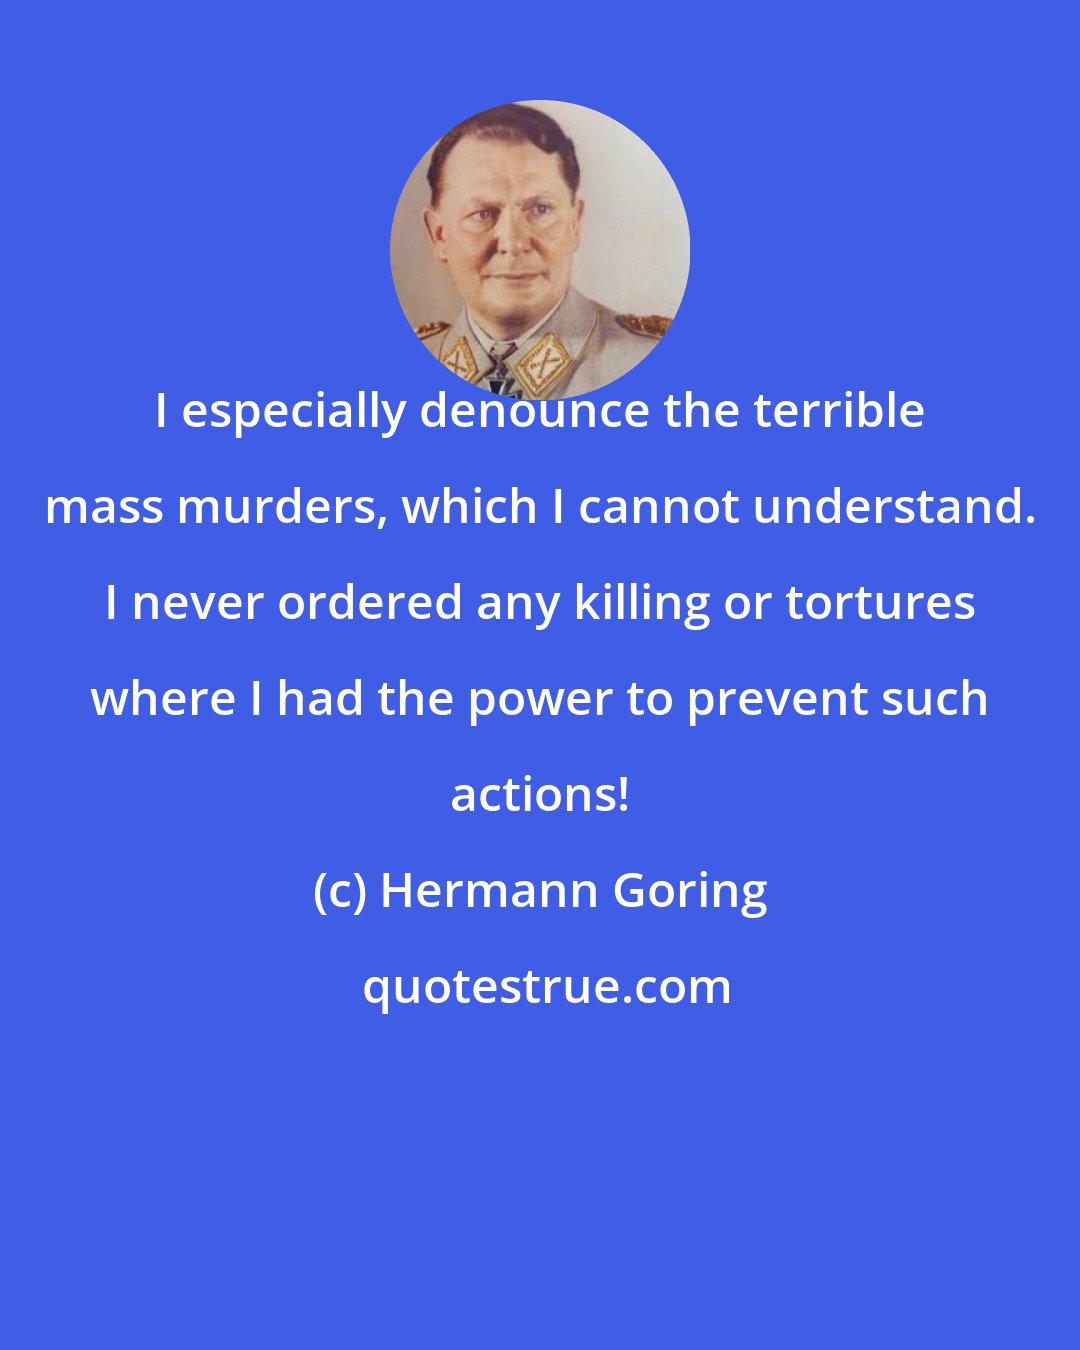 Hermann Goring: I especially denounce the terrible mass murders, which I cannot understand. I never ordered any killing or tortures where I had the power to prevent such actions!